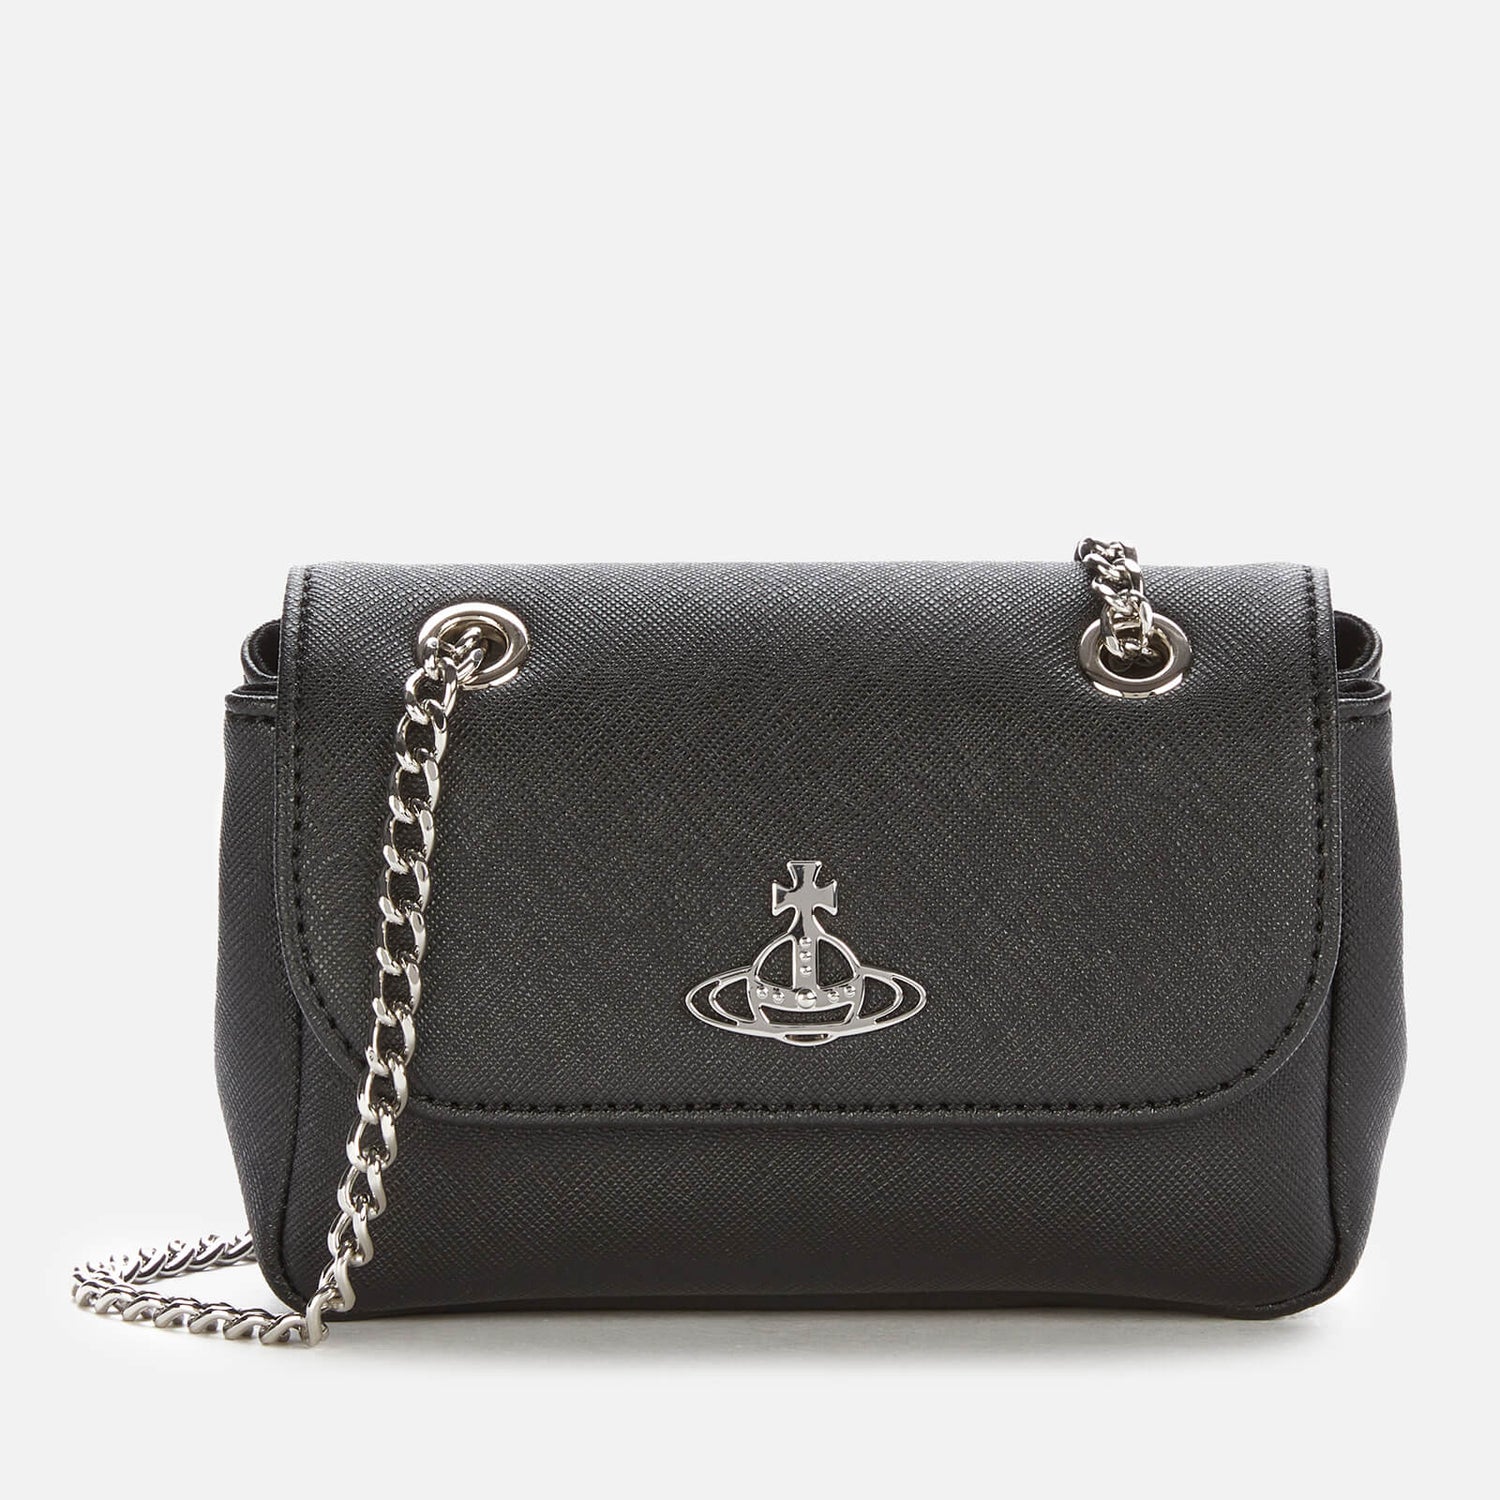 Vivienne Westwood Women's Derby Small Purse with Chain - Black